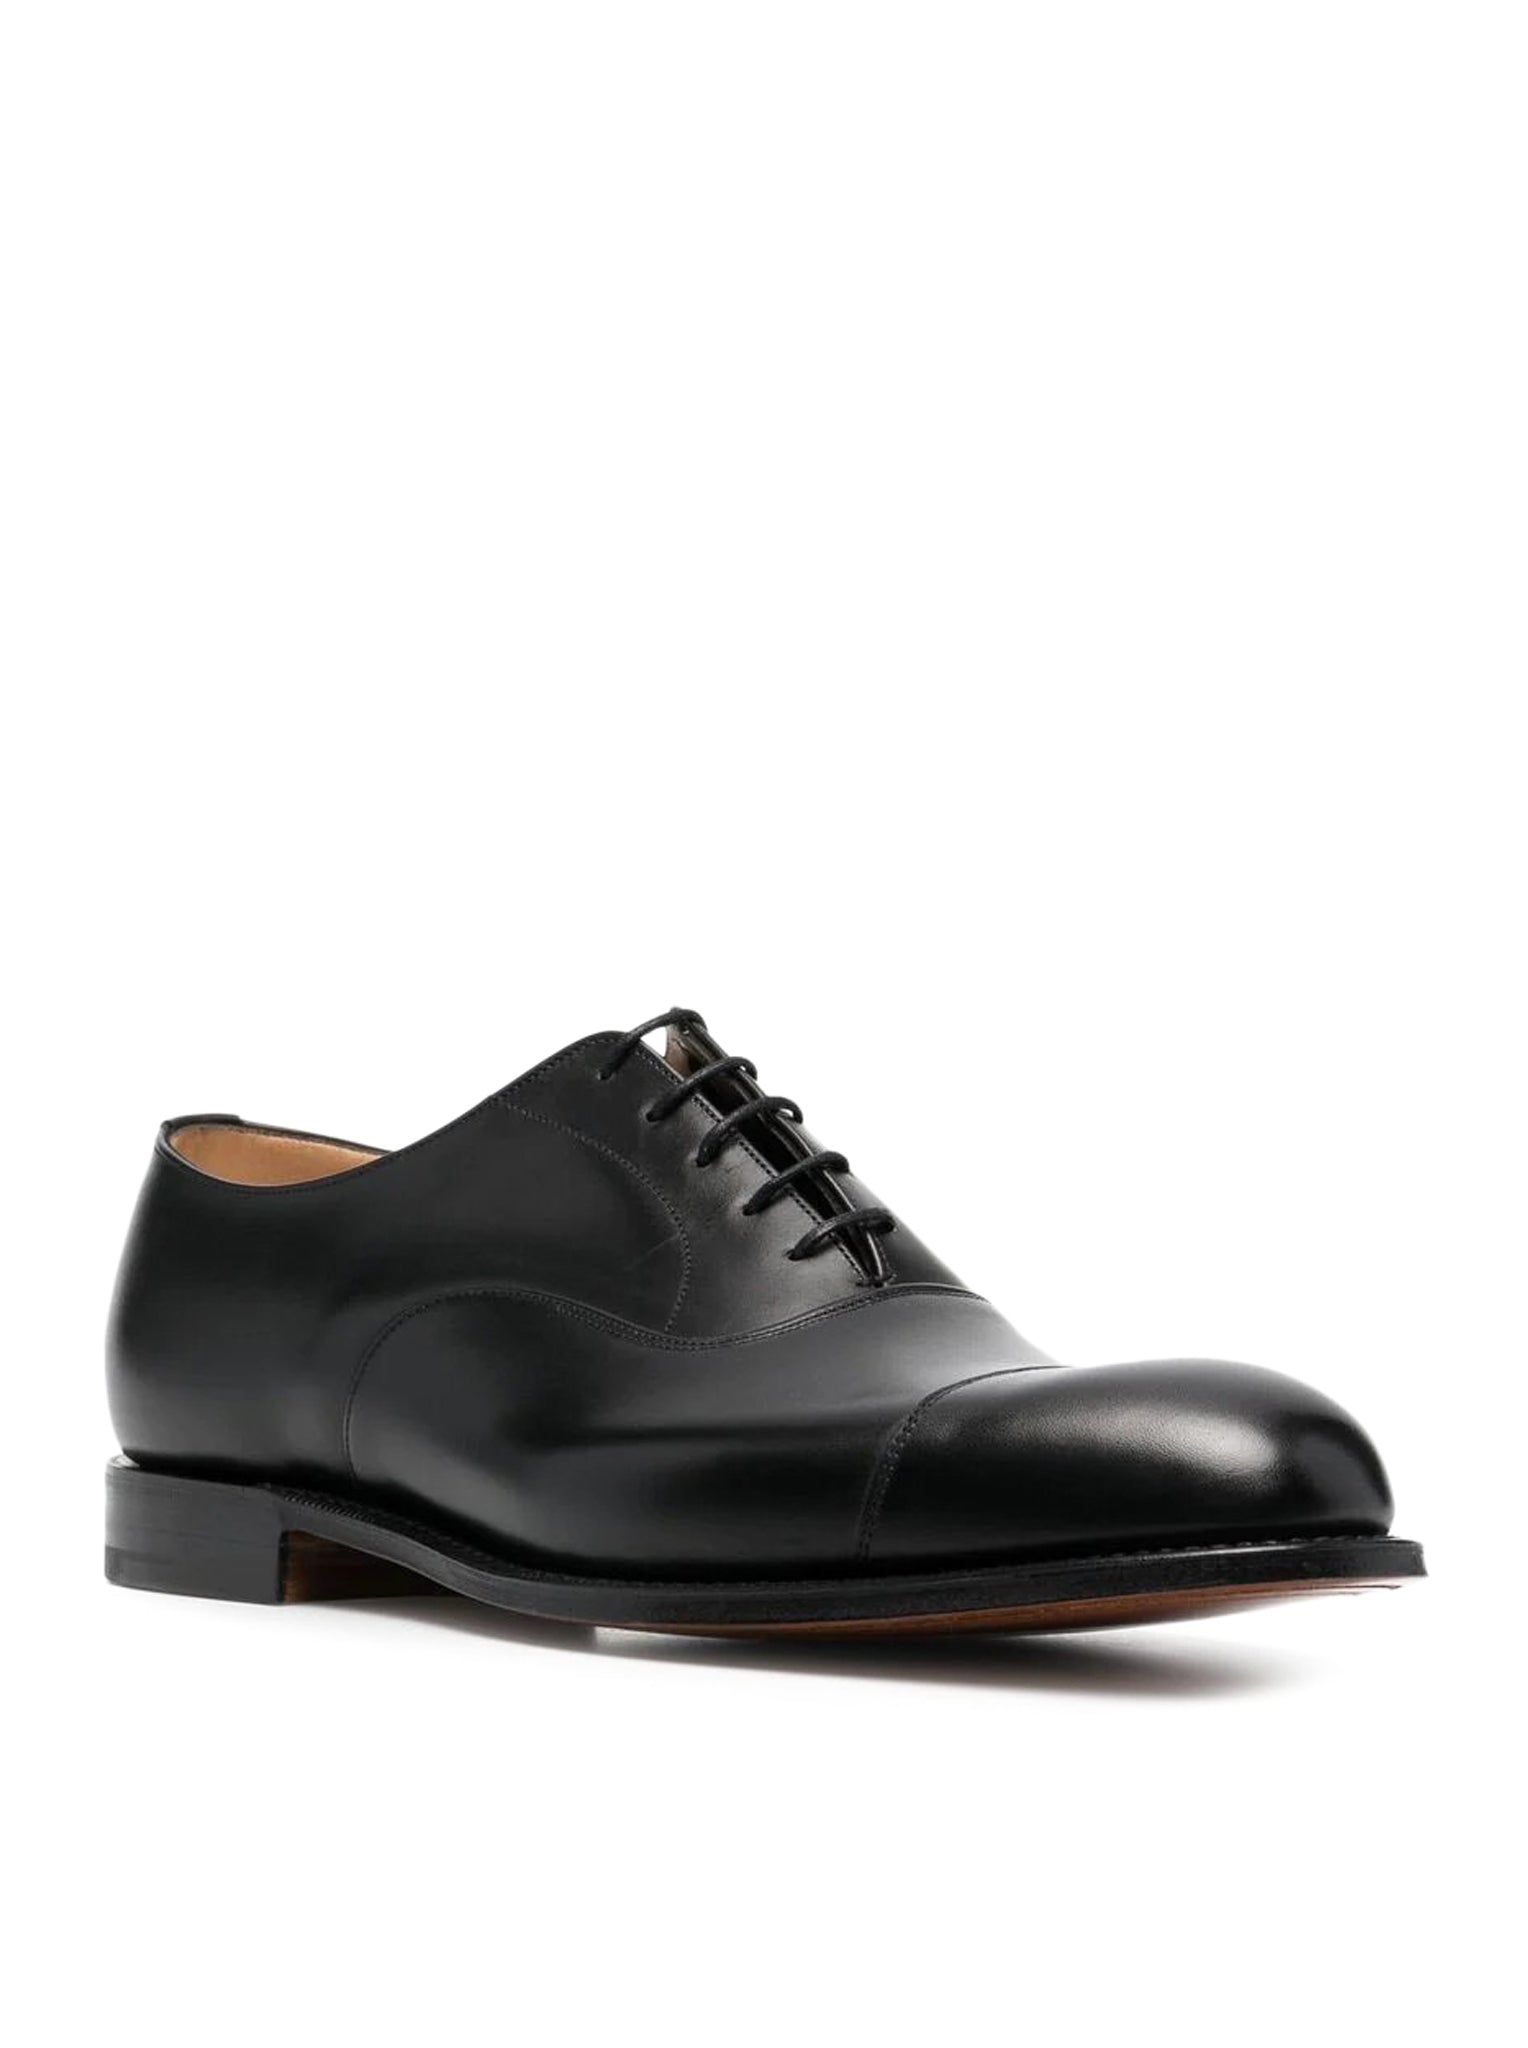 LEATHER DERBY CONSUL